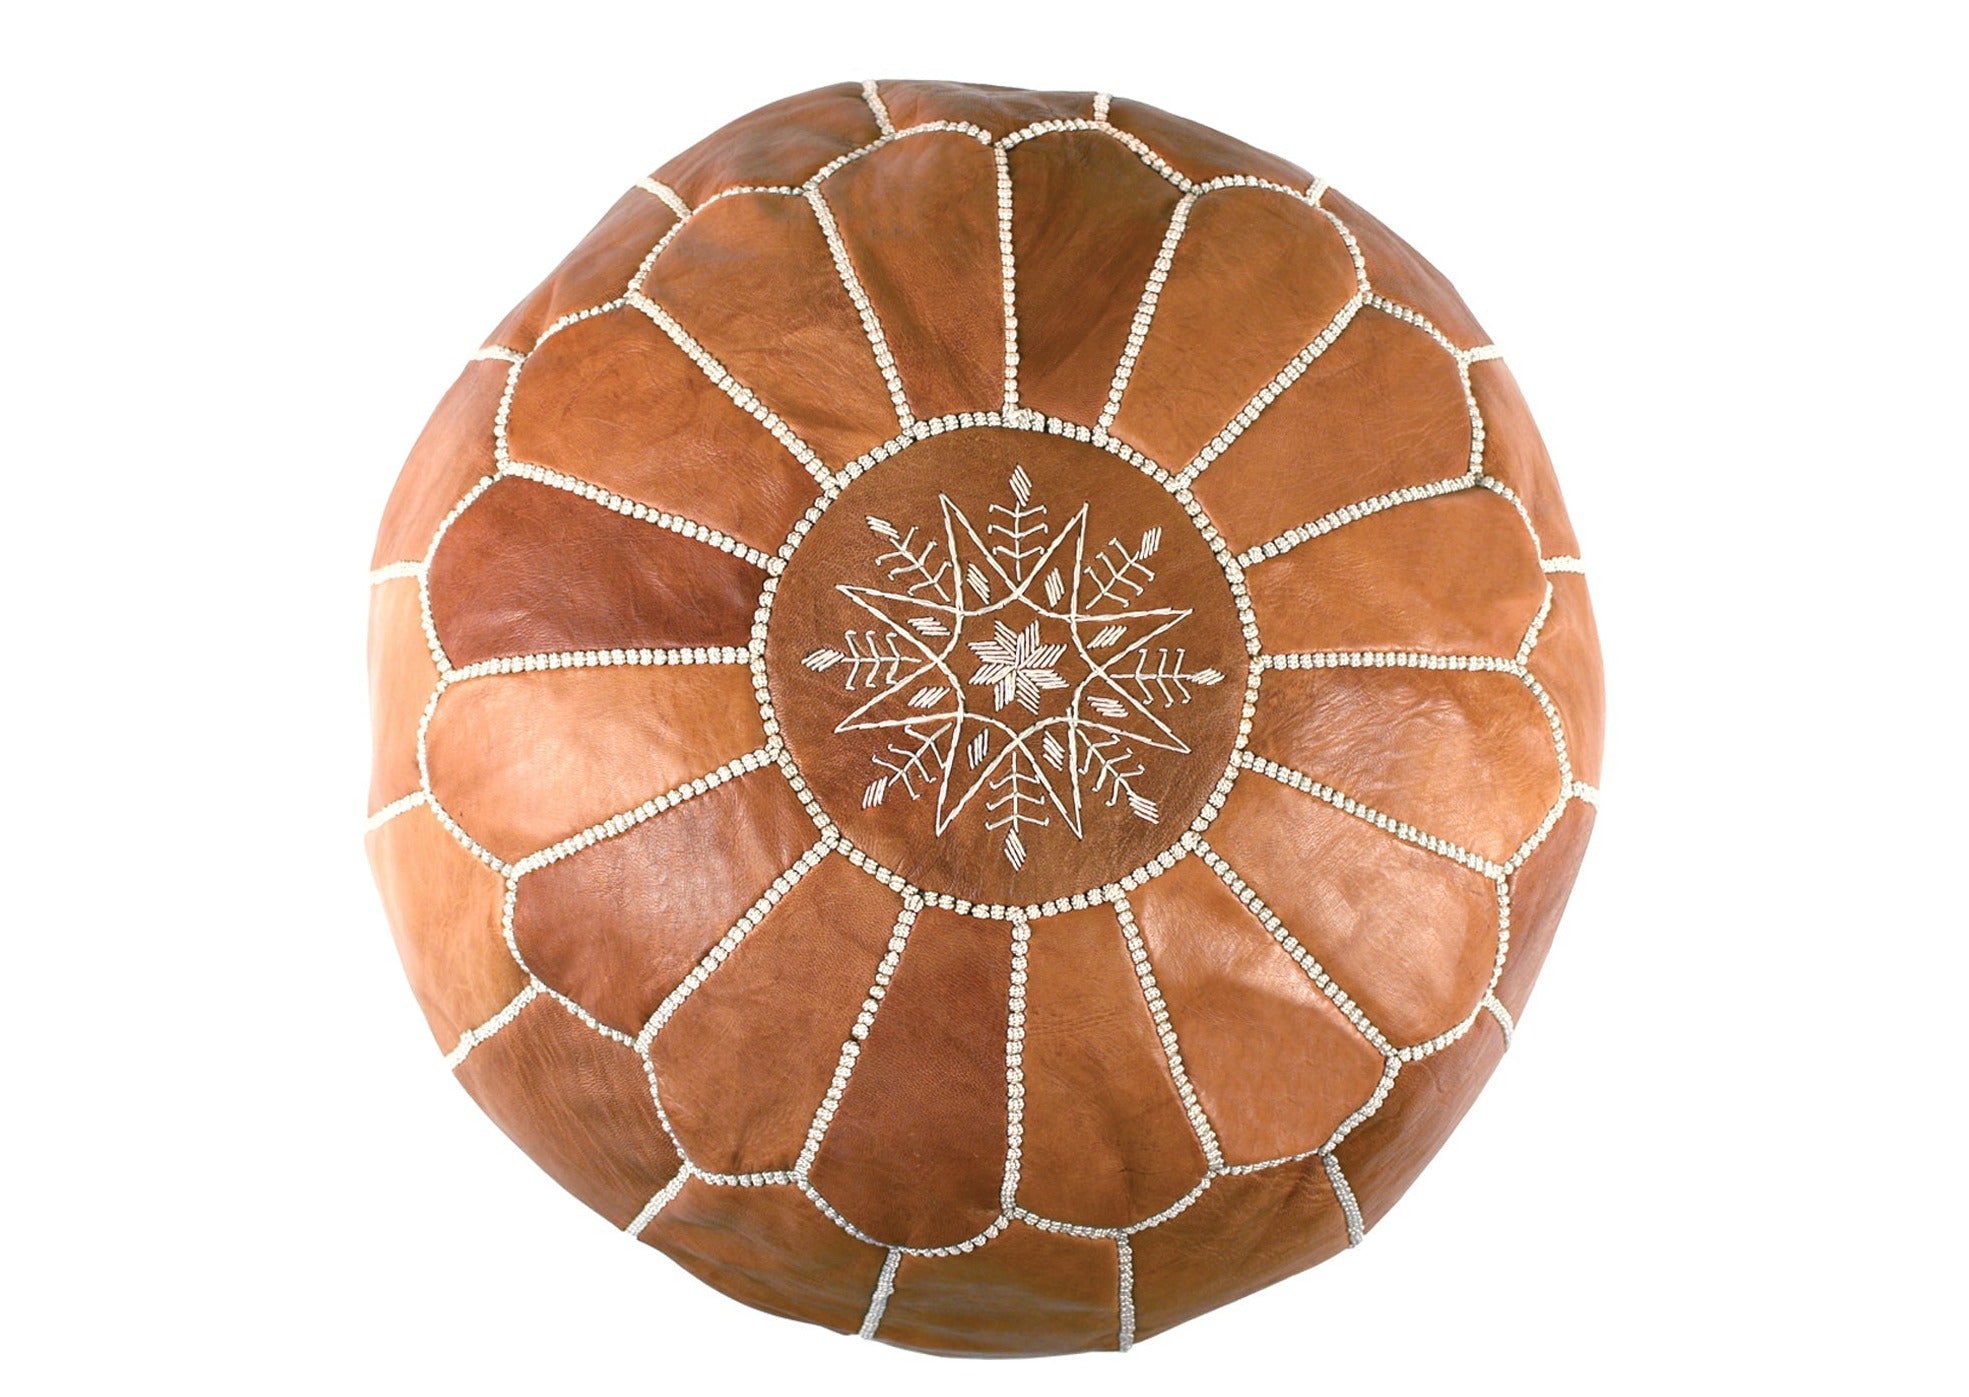 studio shot details of an authentic leather moroccan pouf made in the tanneries of Marrakech by berber artisans. 